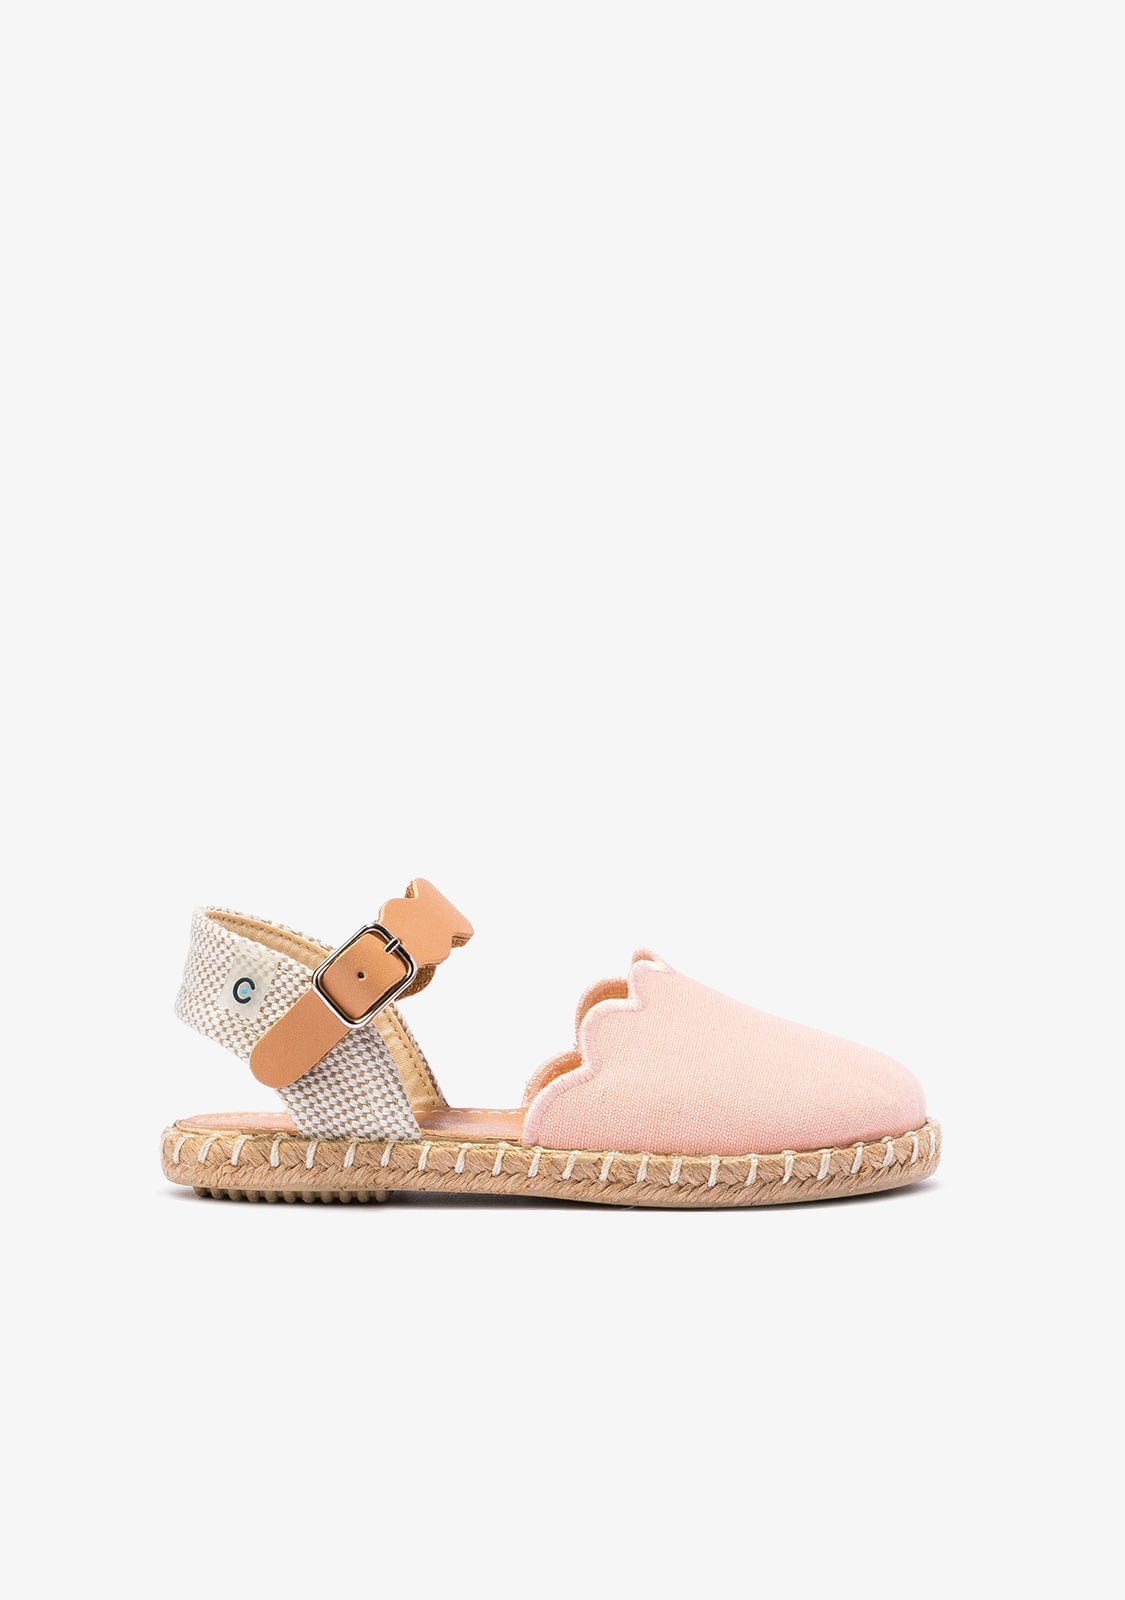 CONGUITOS Shoes Girl's Pink Buckle Espadrilles